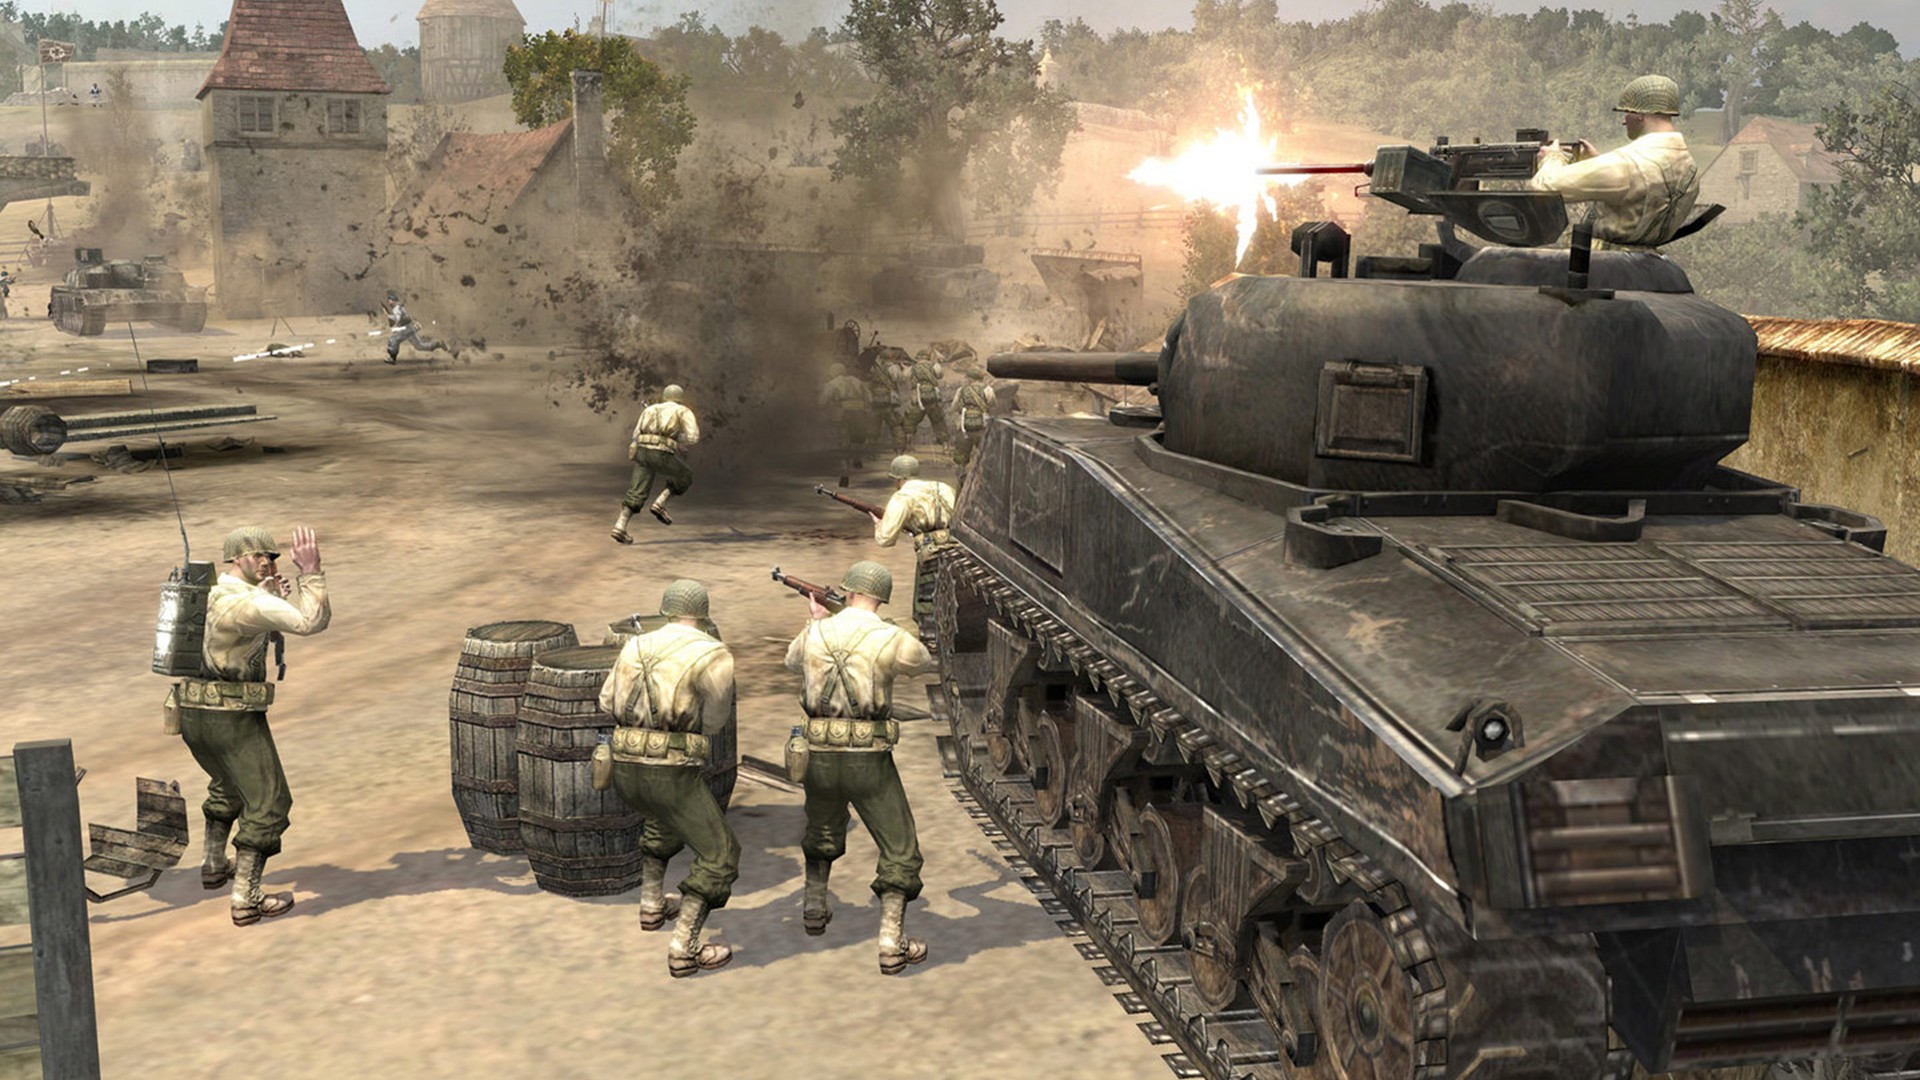 quickest way to win generals in company of heroes 3